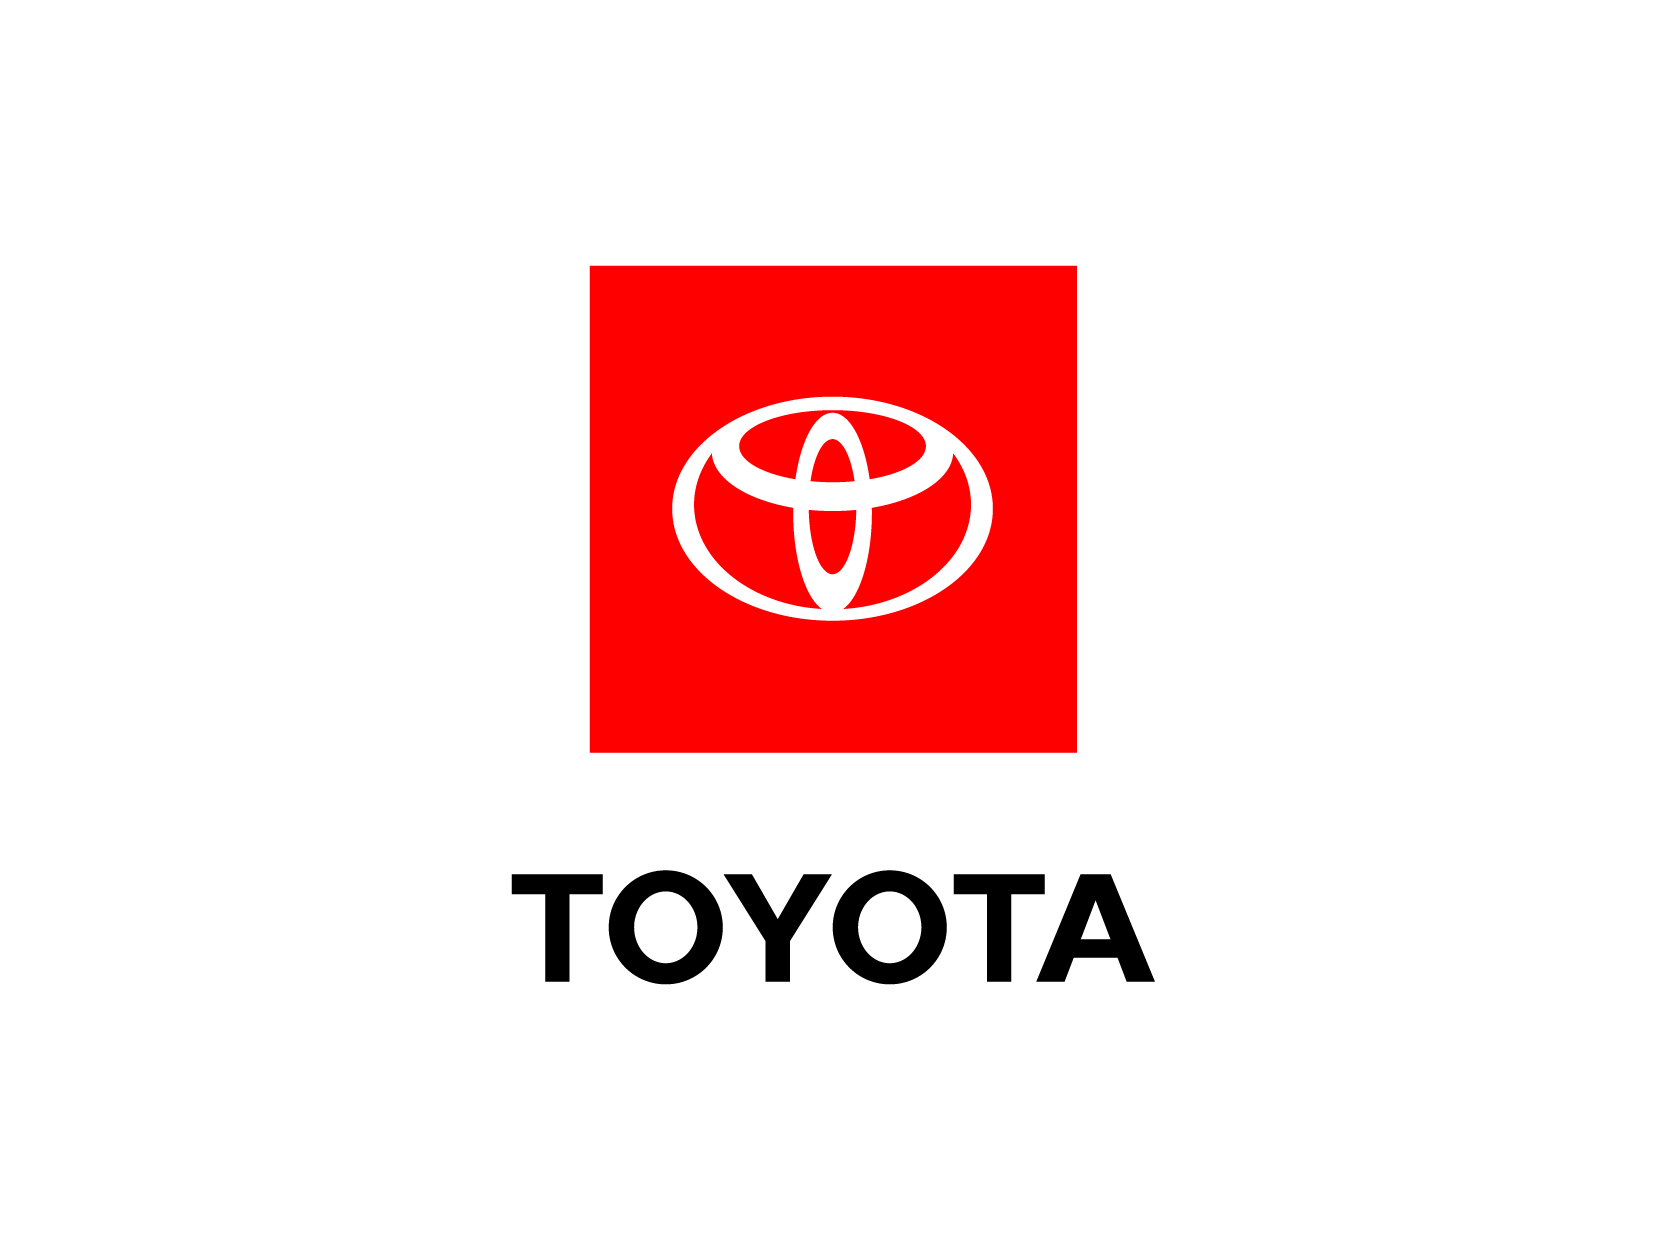 Toyota Car Logo PNG Image for Free Download